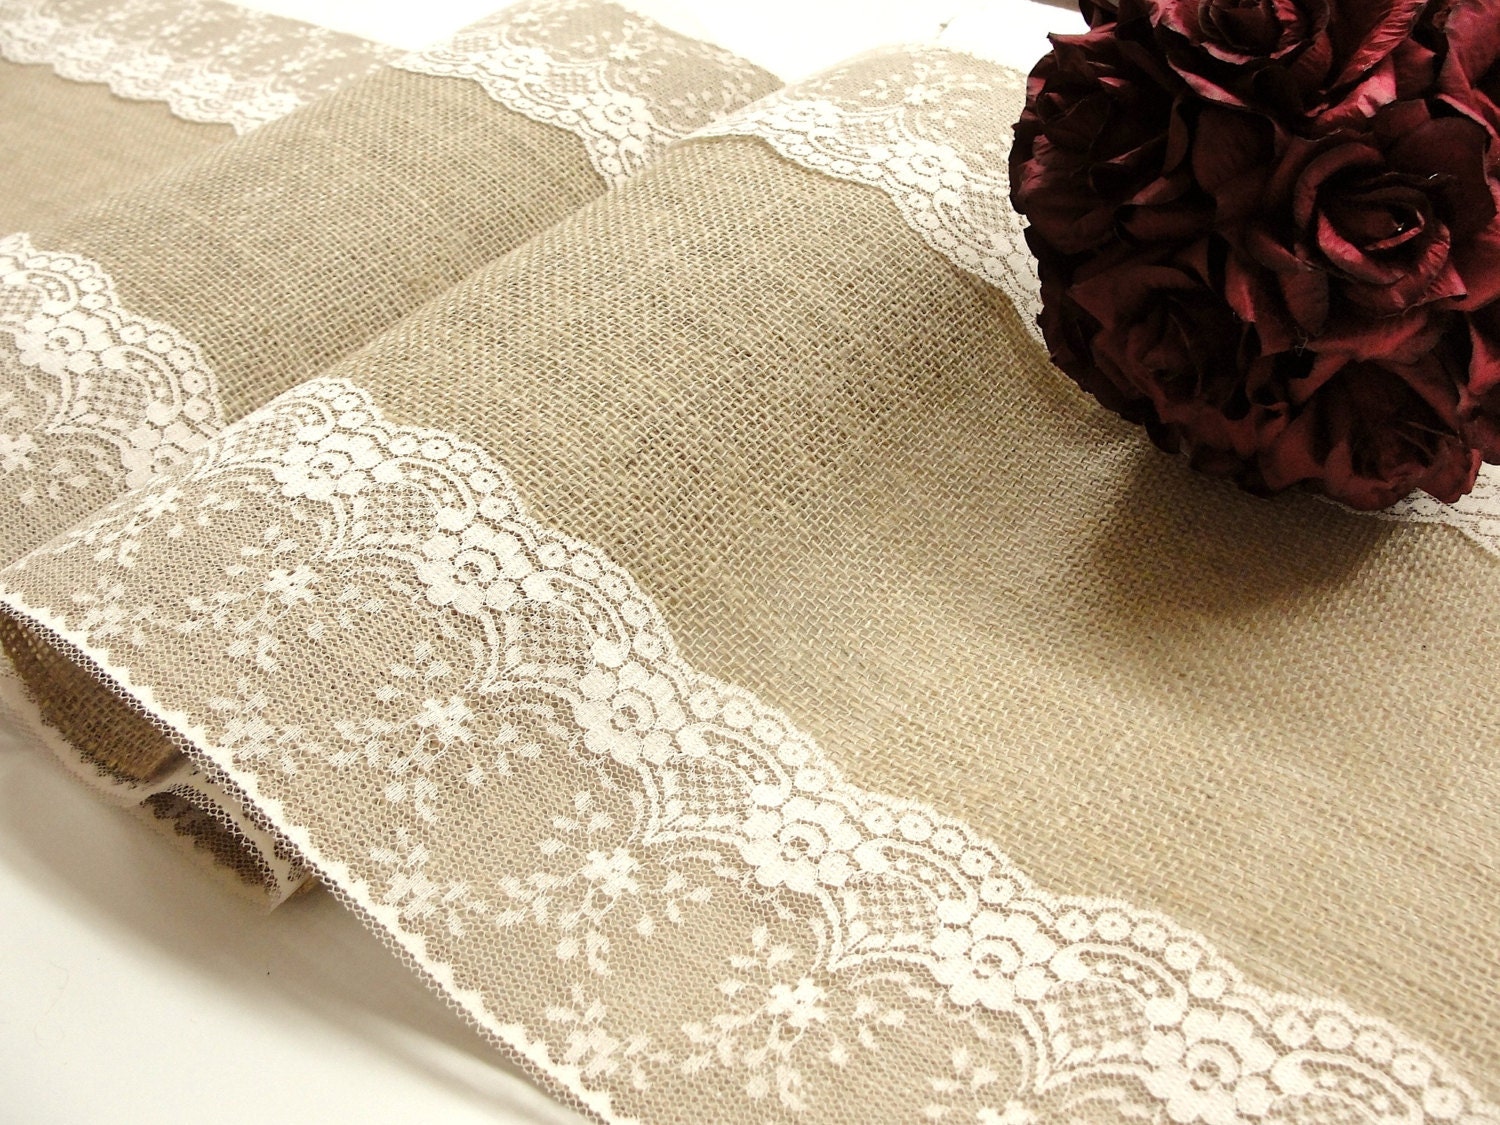 Burlap and lace table runner,country wedding table decor, Handmade in the USA